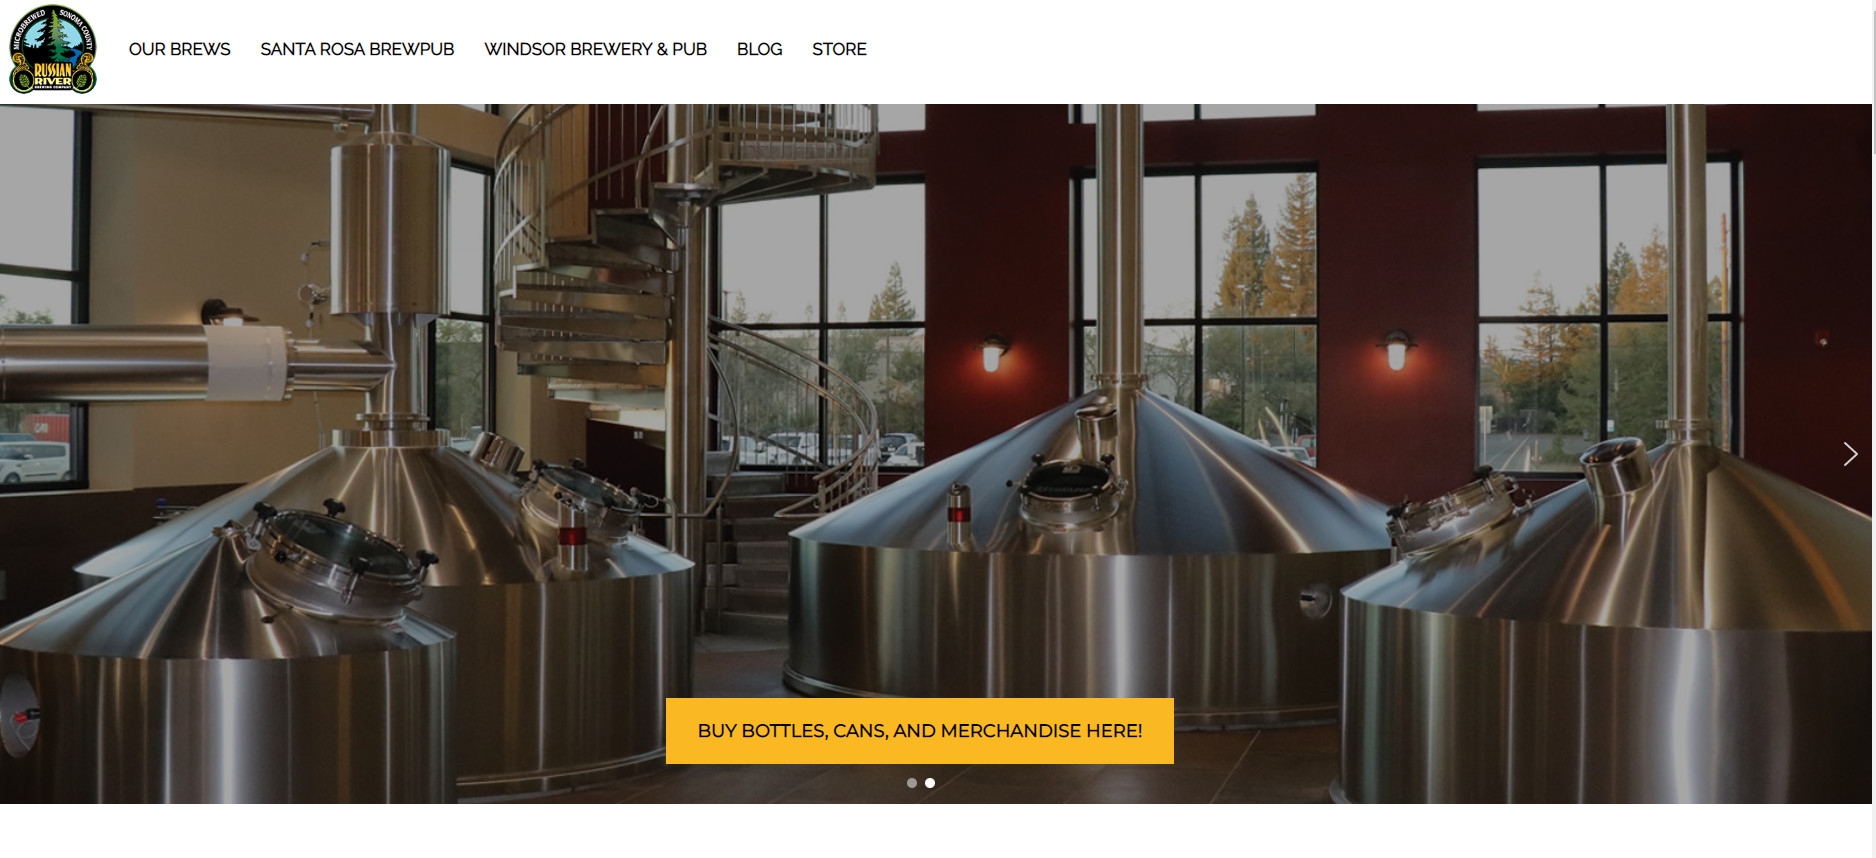 brewery website template example Russian River Brewing Co.